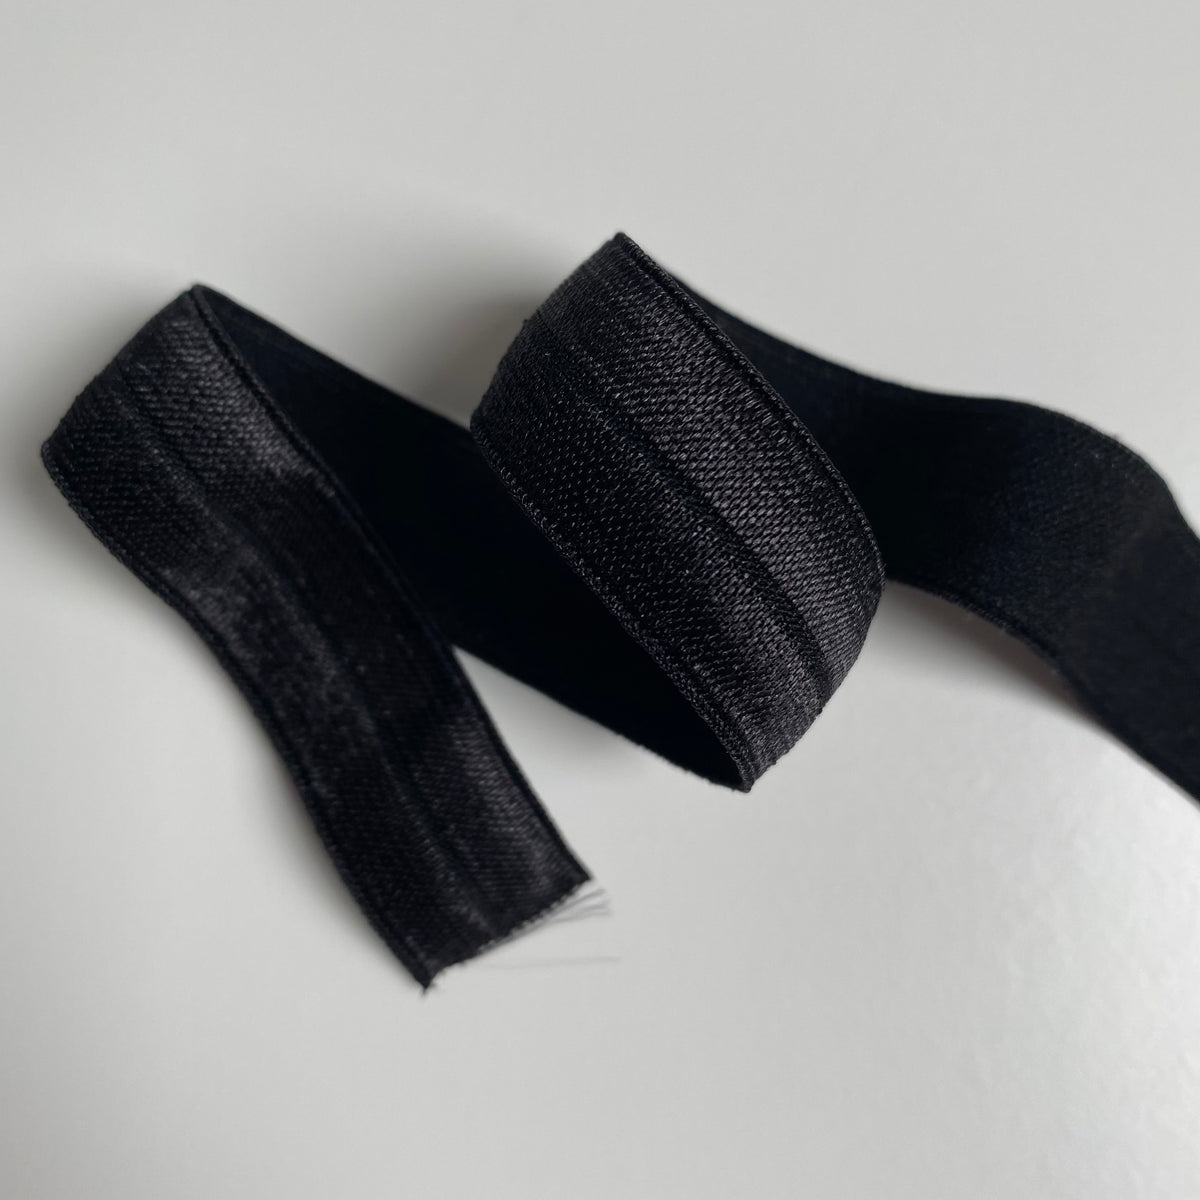 Organic Elastic - 28mm - Available in Ecru and Black – Fabric Romance